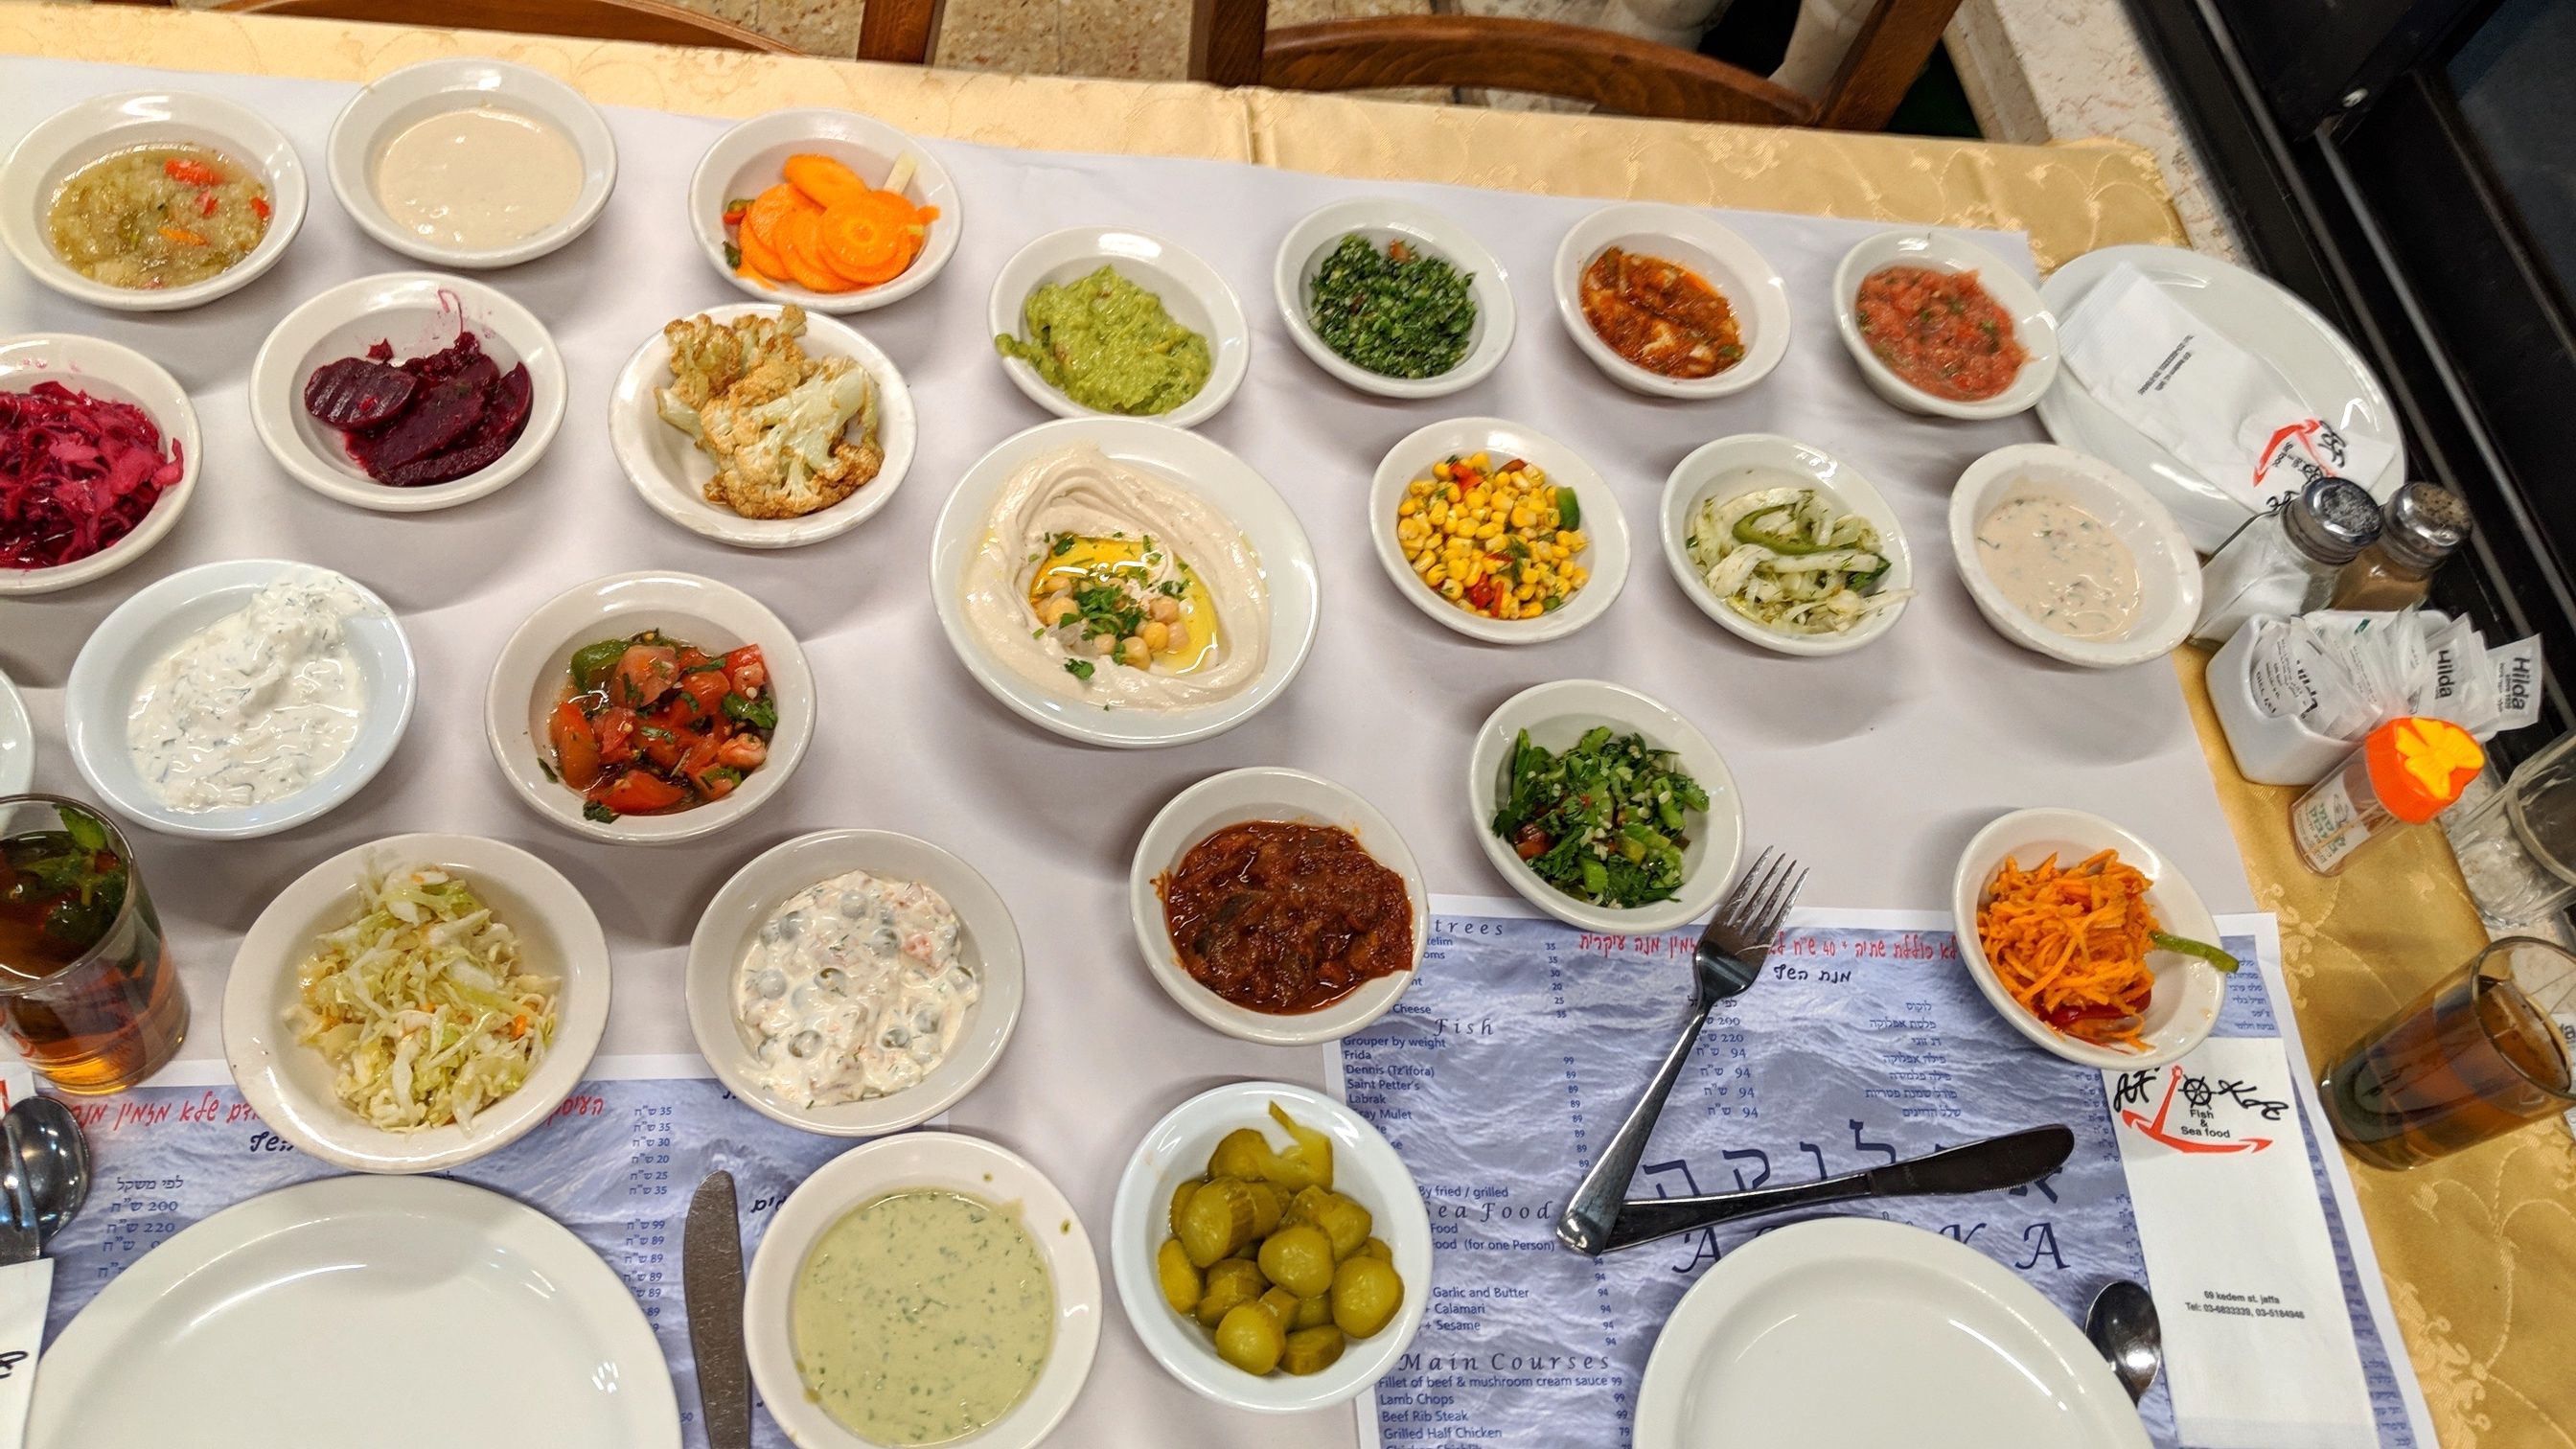 25 fresh delicious salads served with every meal in certain restaurants in Israel as part of the meal